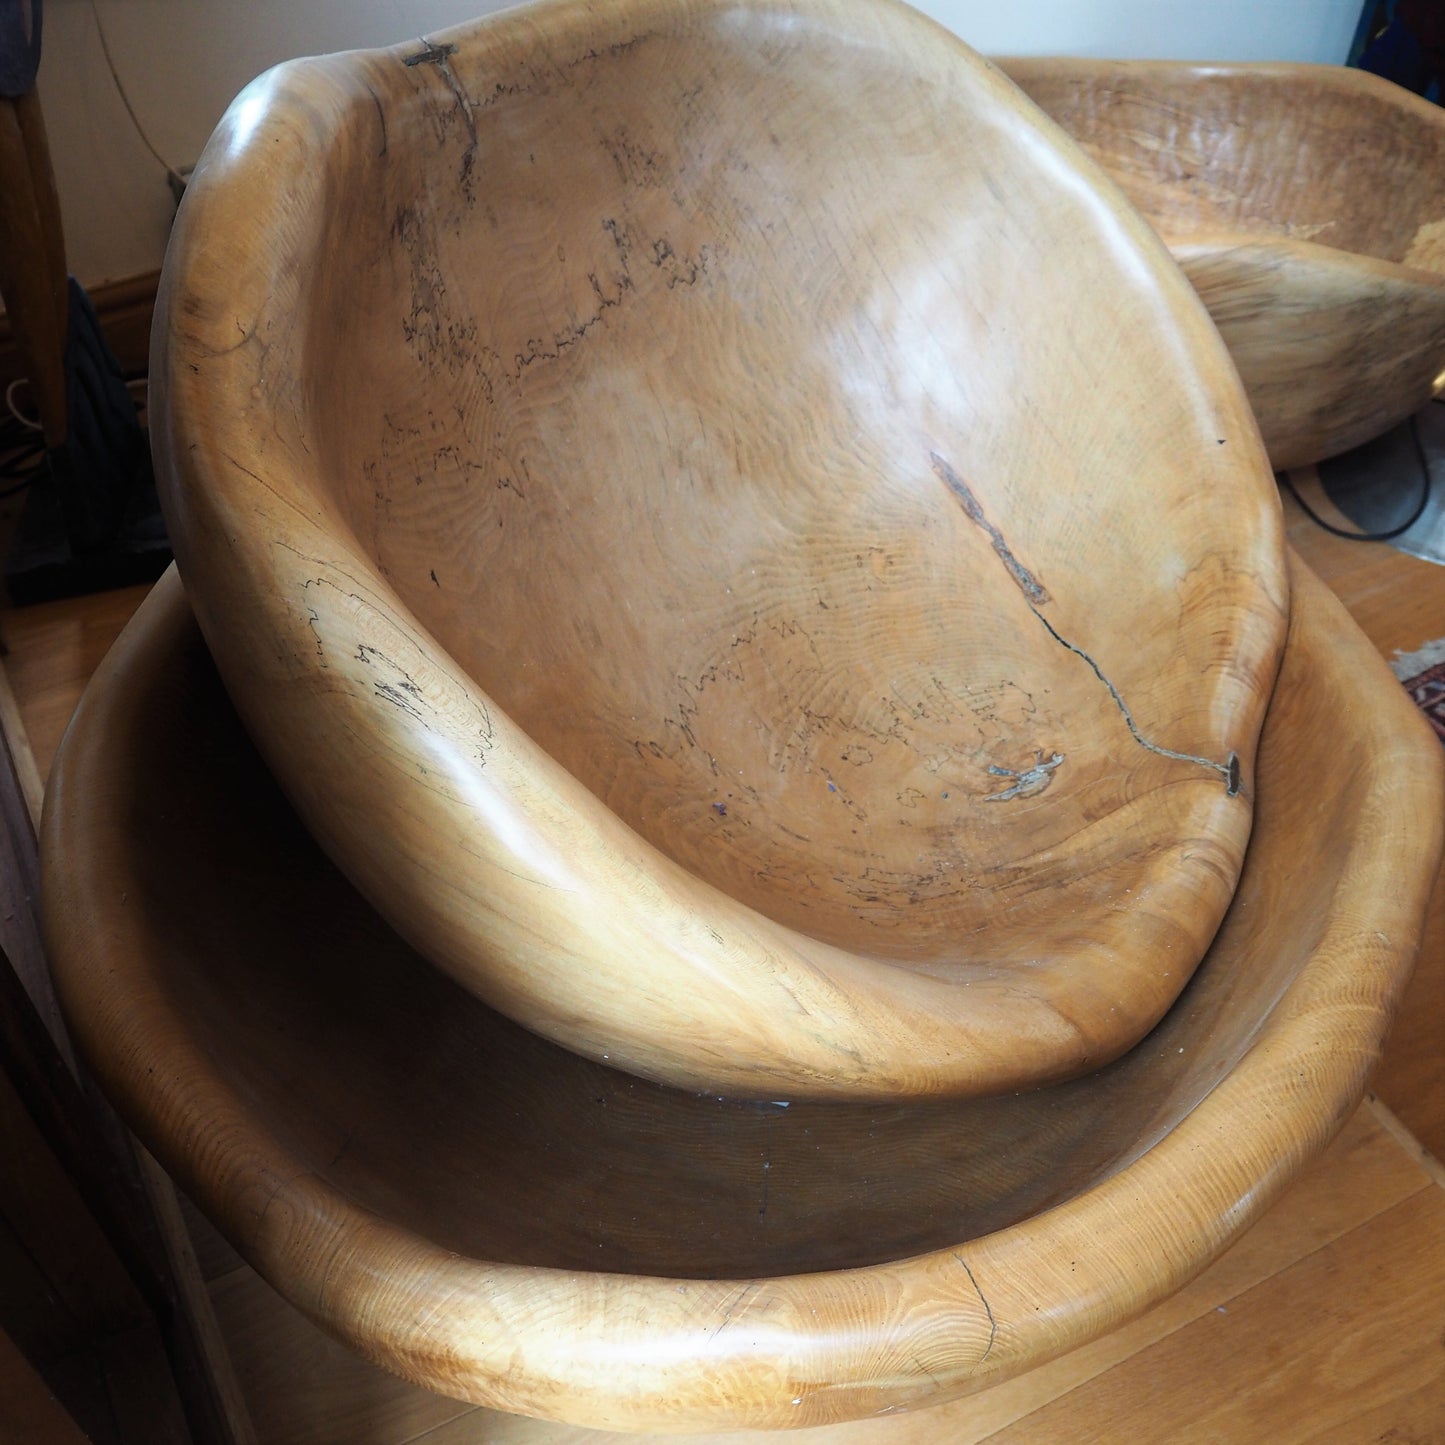 Caton, Paul - Hand Carved Wooden Bowls